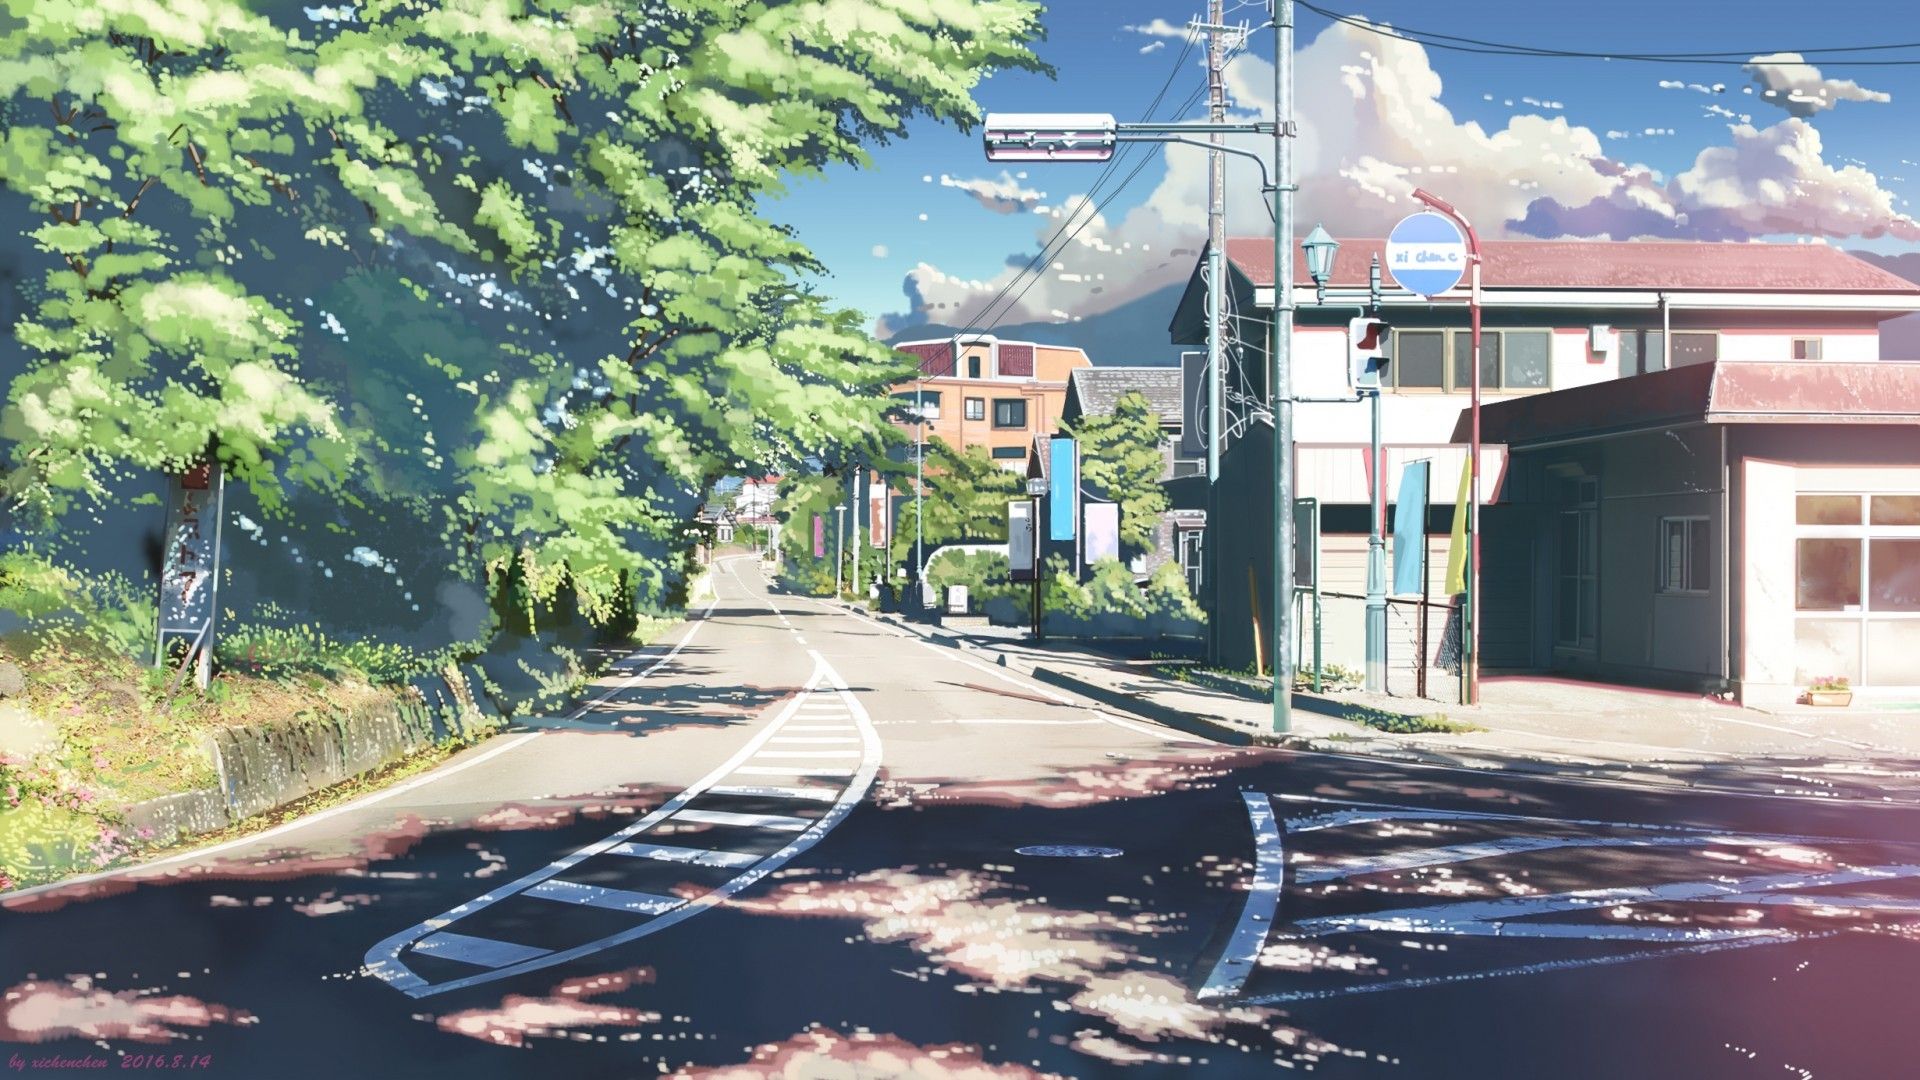 Download 1920x1080 Anime Landscape, Road, Buildings, Trees, Sunshine, Clouds, Scenic Wallpaper for Widescreen